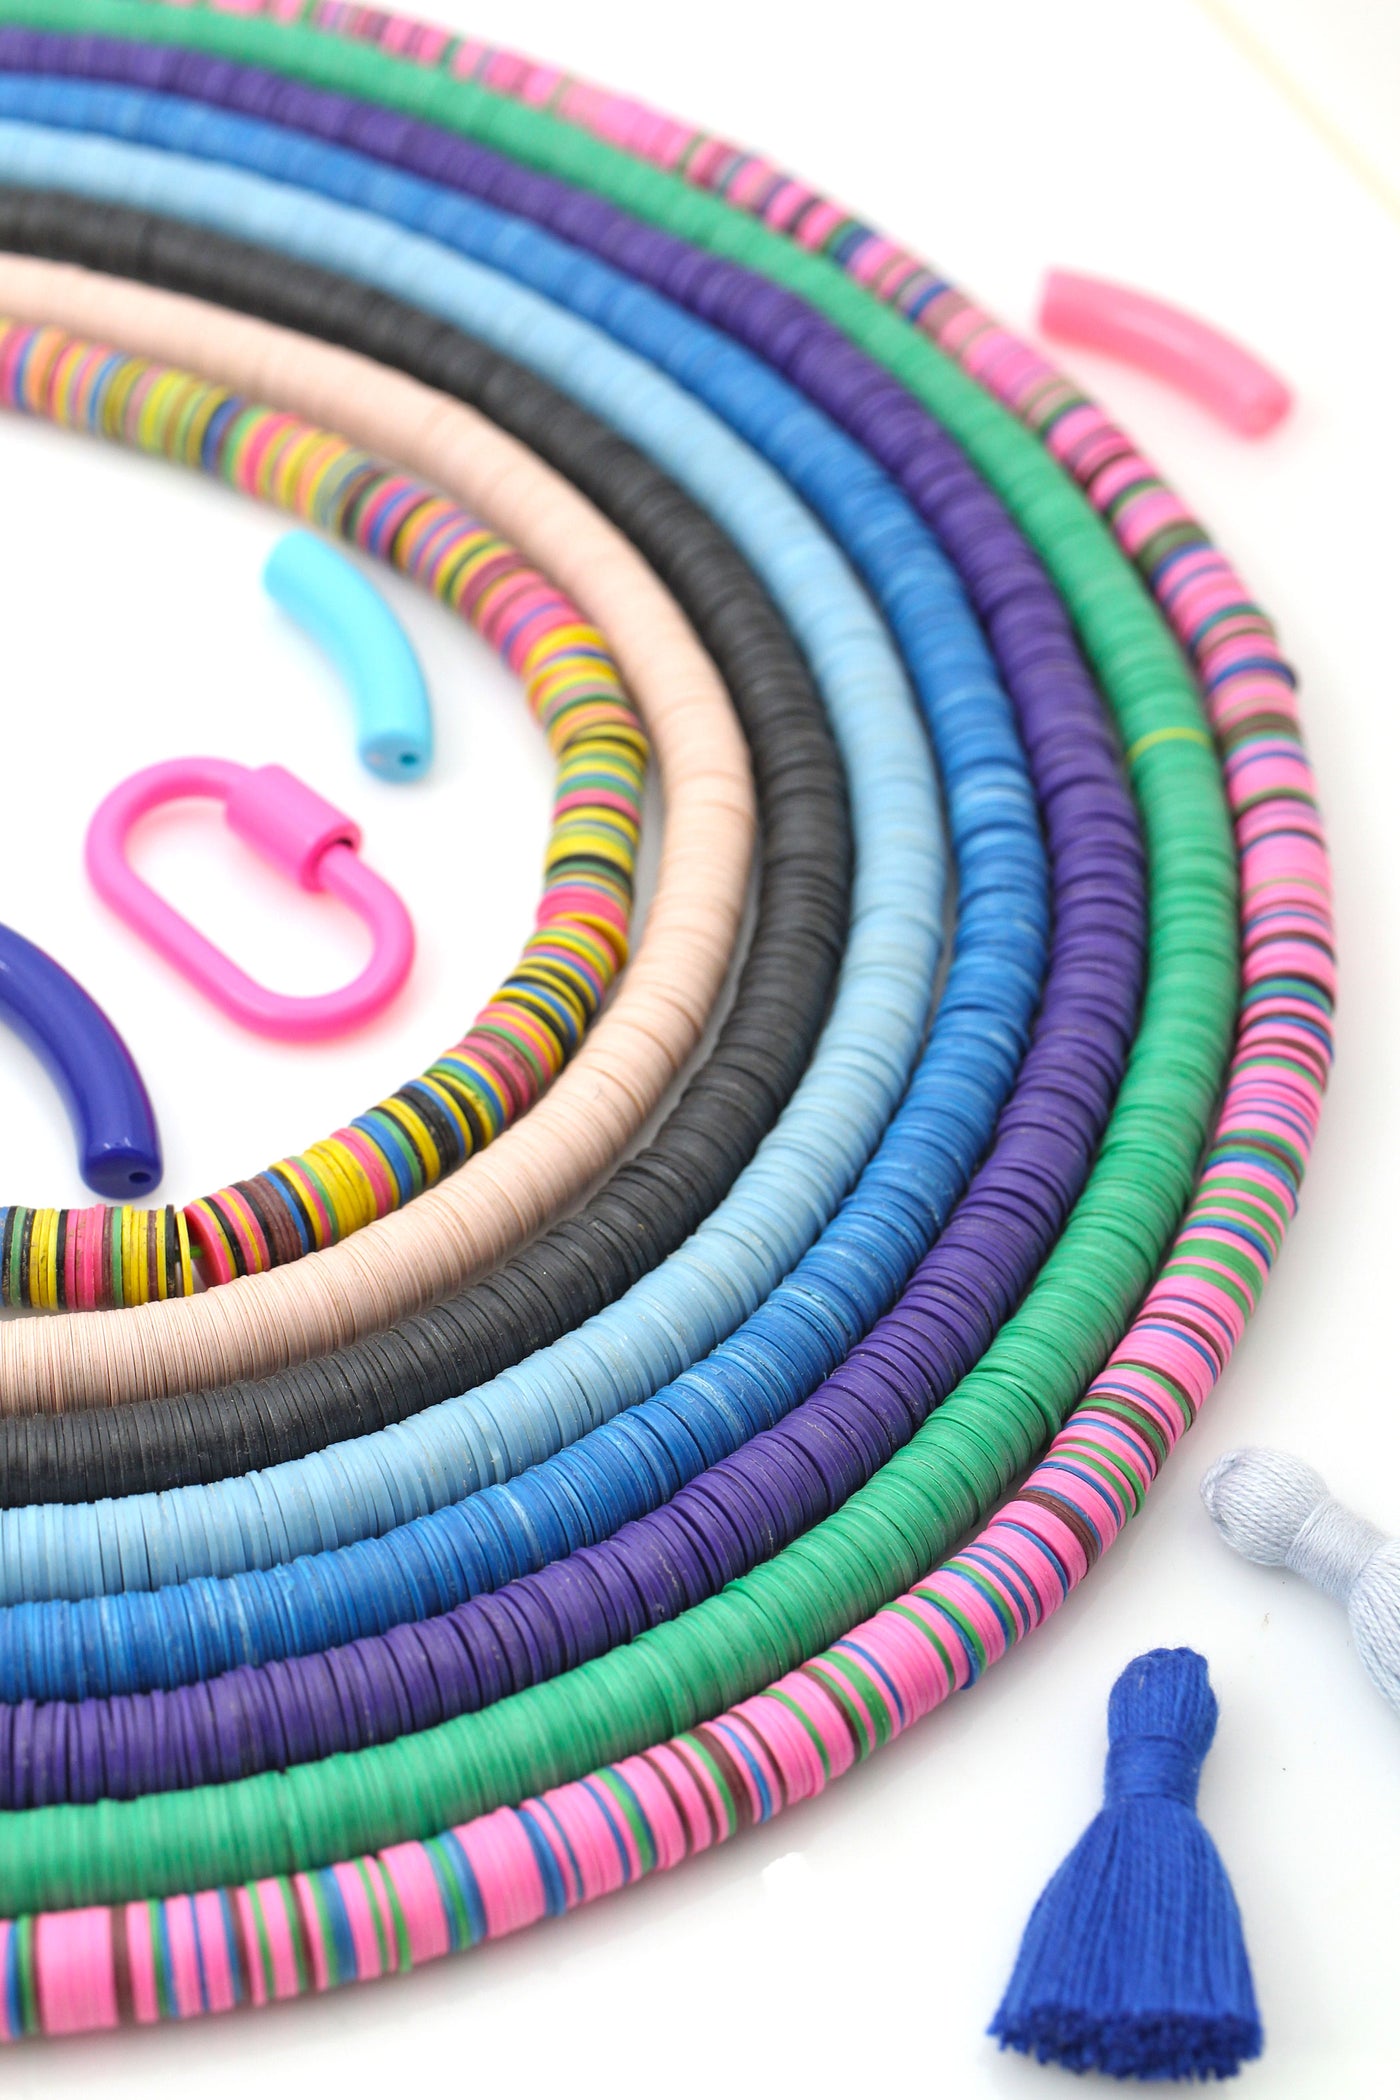 8mm African Vinyl Record Beads, Colorful Heishi Thin Disc Spacer Beads